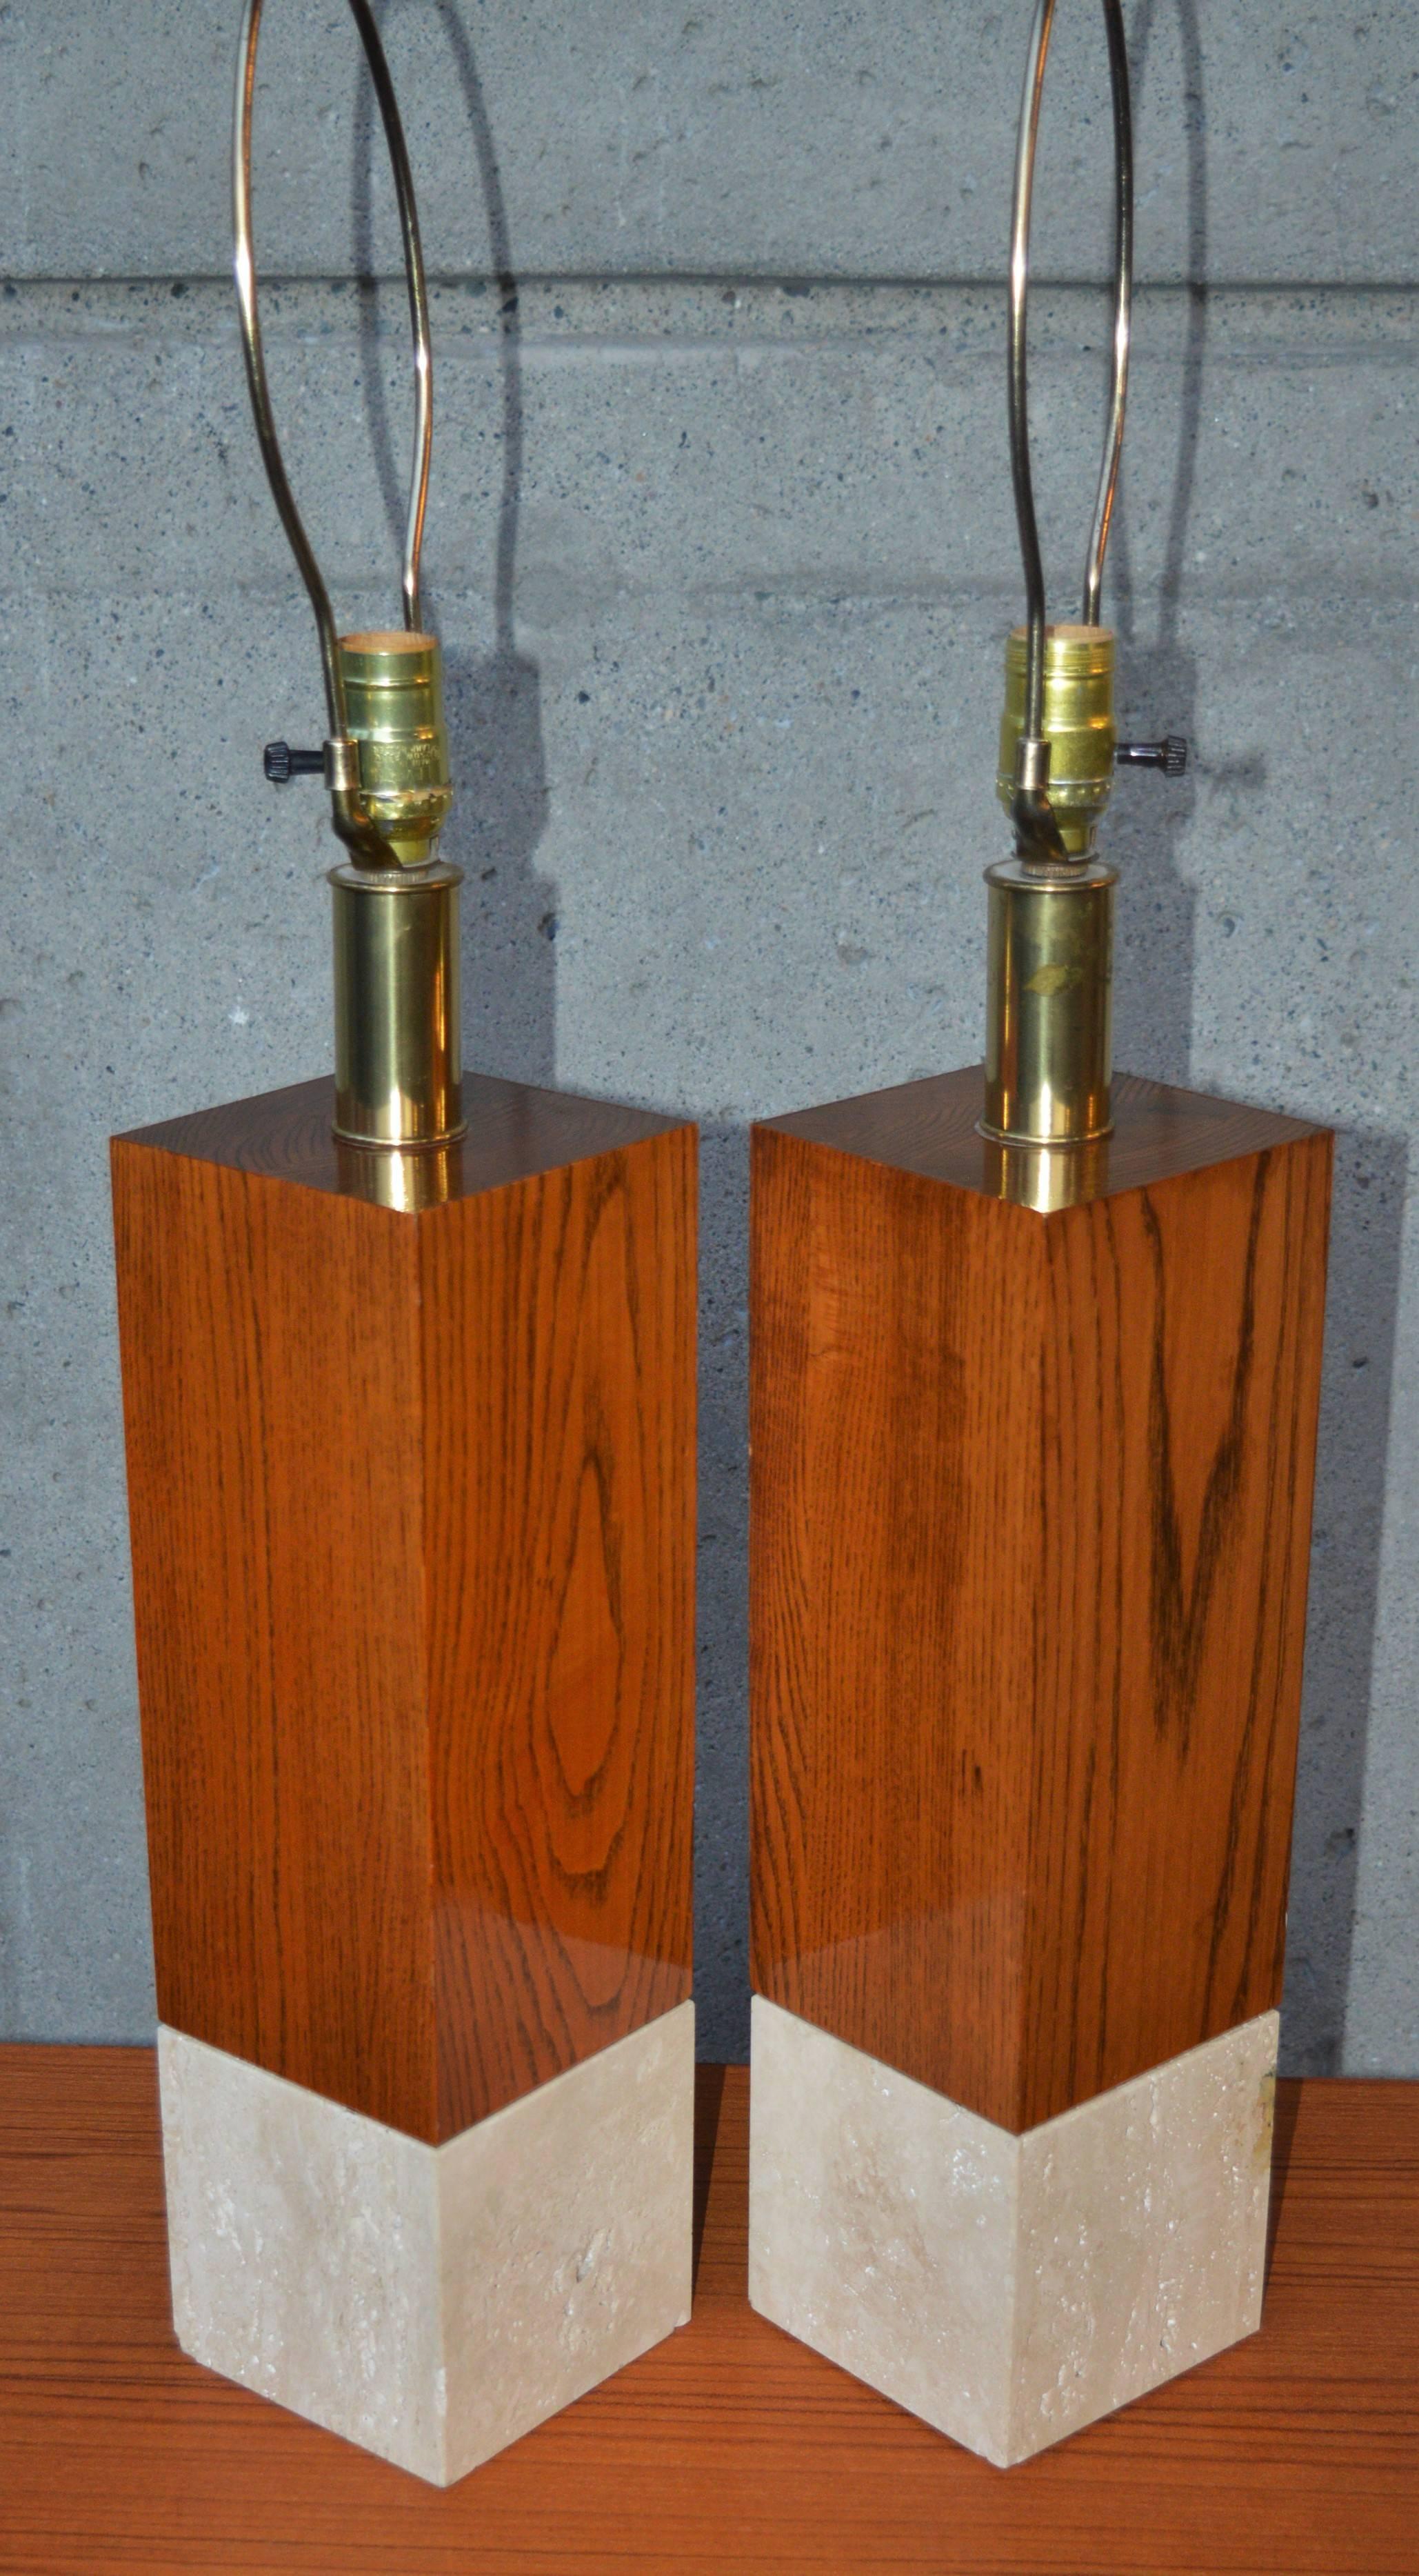 This striking pair of Italian table lamps have beautiful, clean modern lines. The cubic design has solid oak upper sections with a rich patina contrasted against the creamy marble bases. Note the slight beveled edge detail where they both meet.